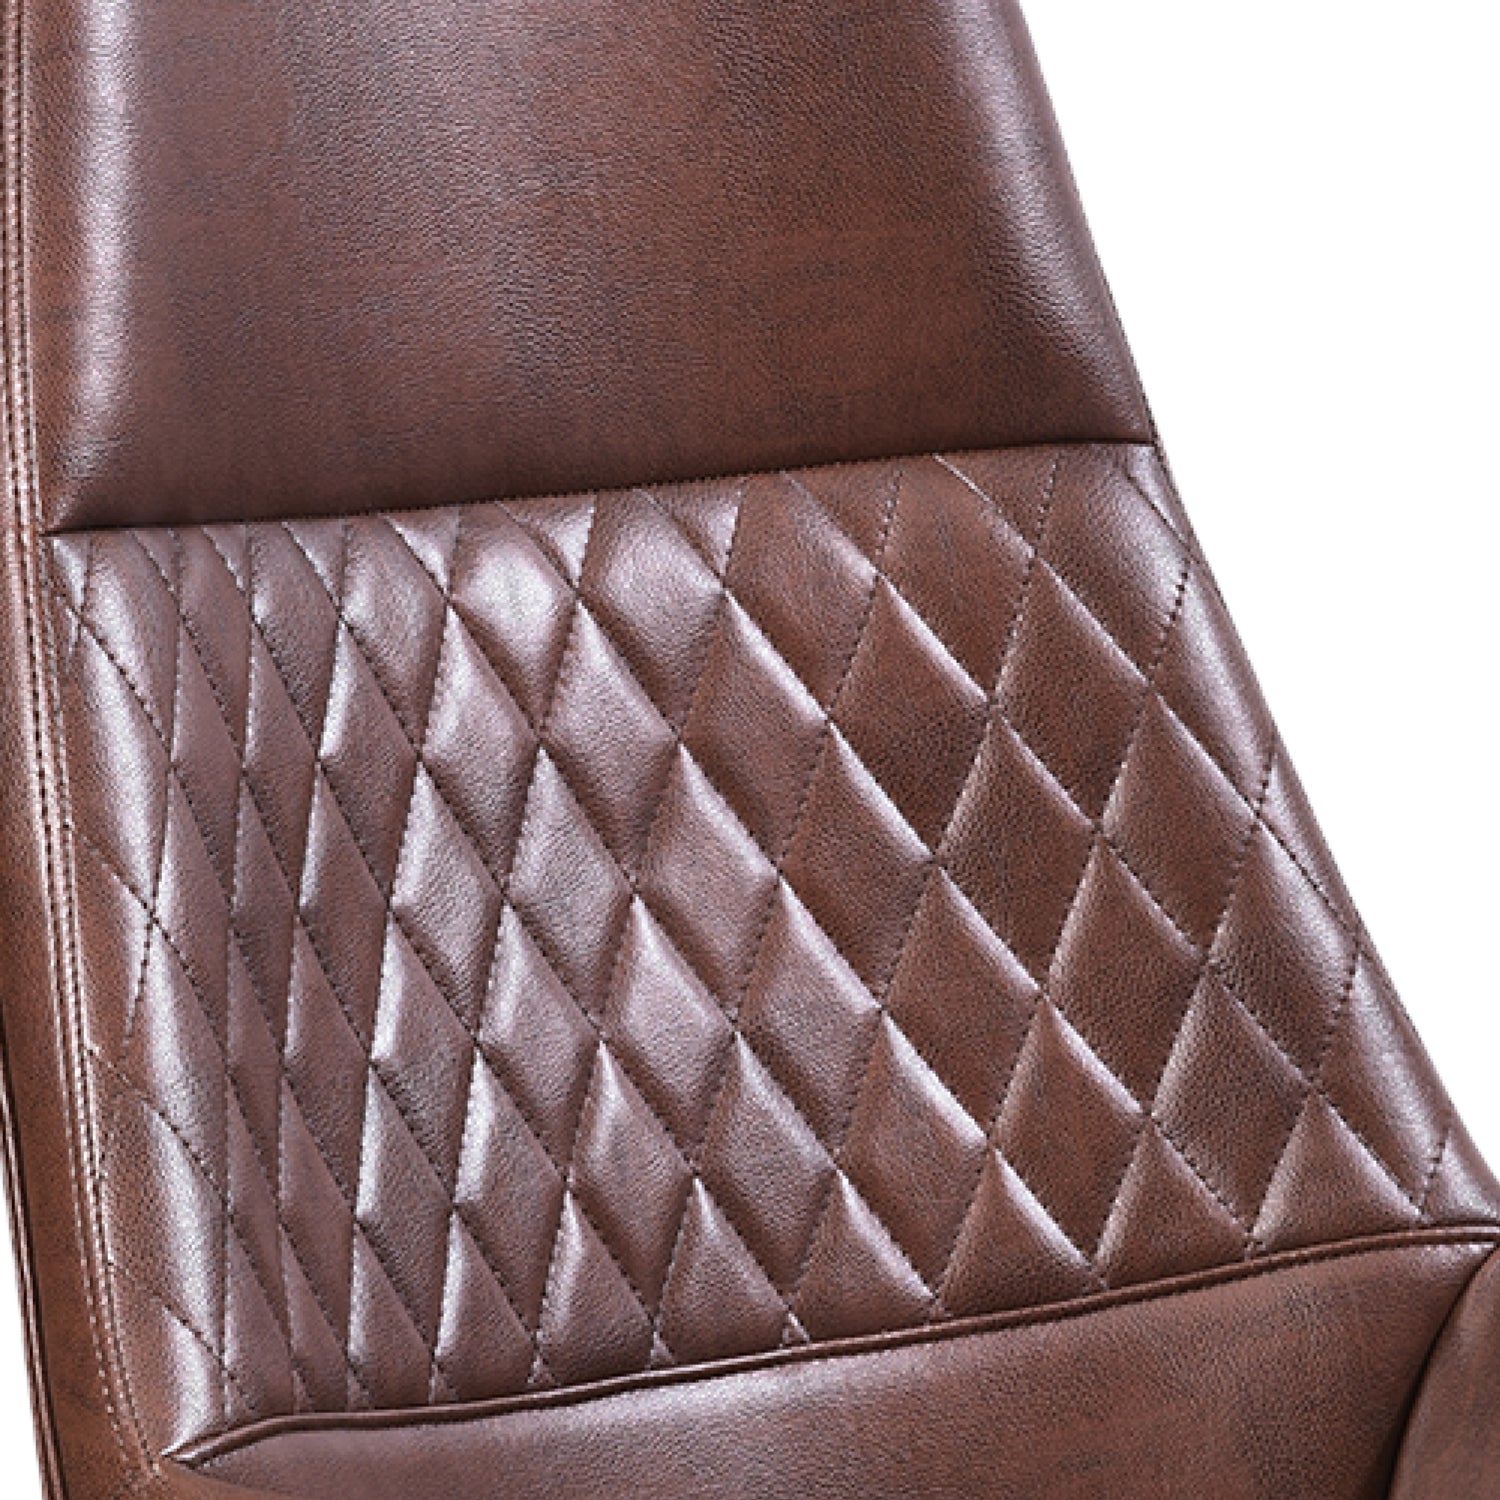 ZFB1005 High Back Chair by Zorin in Brown Color Zorin